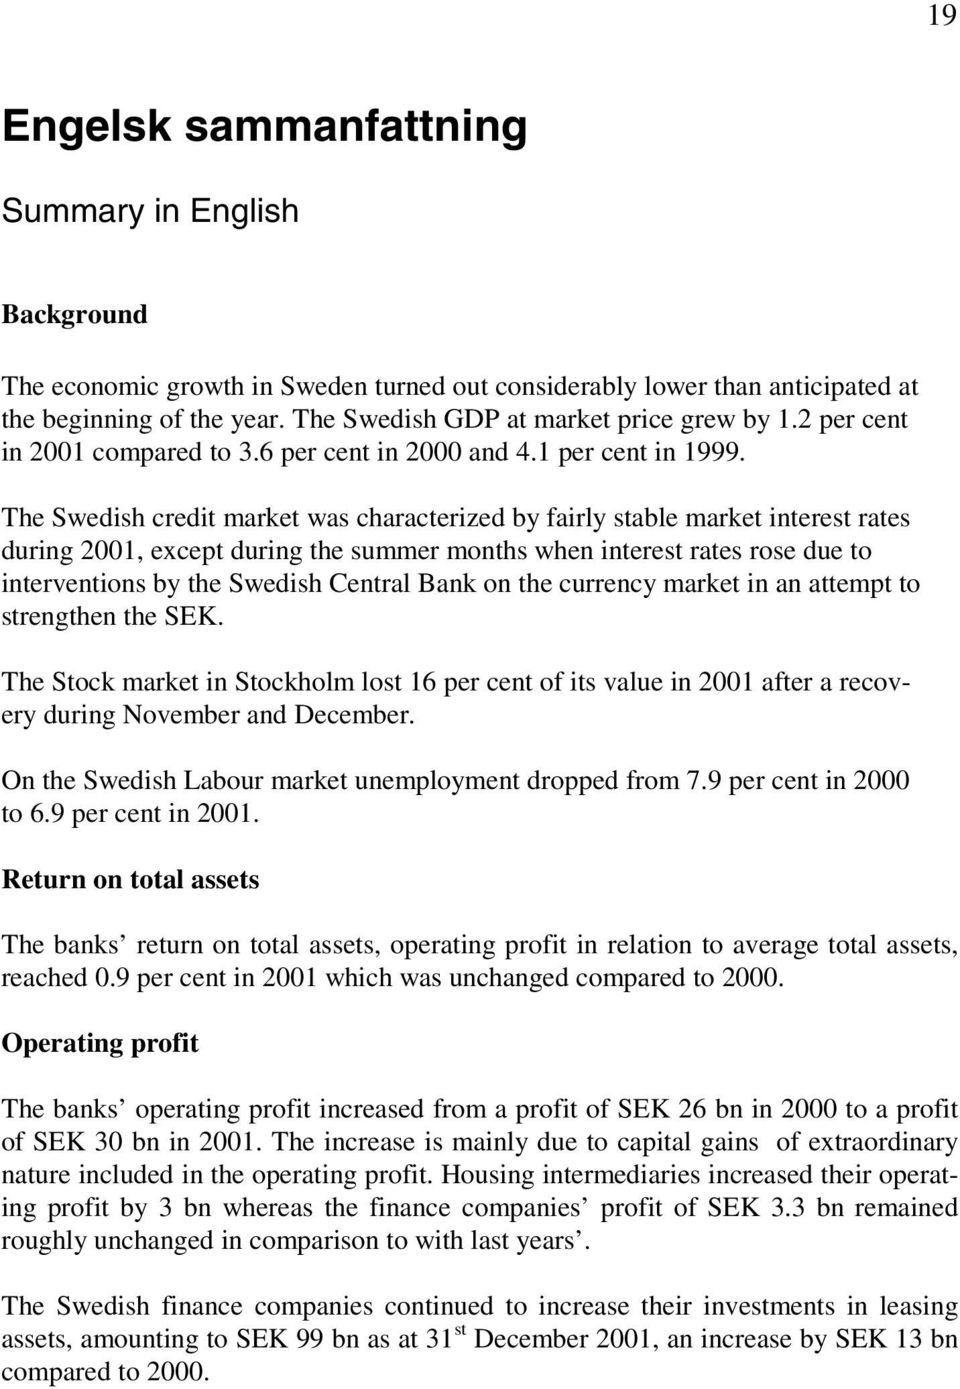 The Swedish credit market was characterized by fairly stable market interest rates during 2001, except during the summer months when interest rates rose due to interventions by the Swedish Central